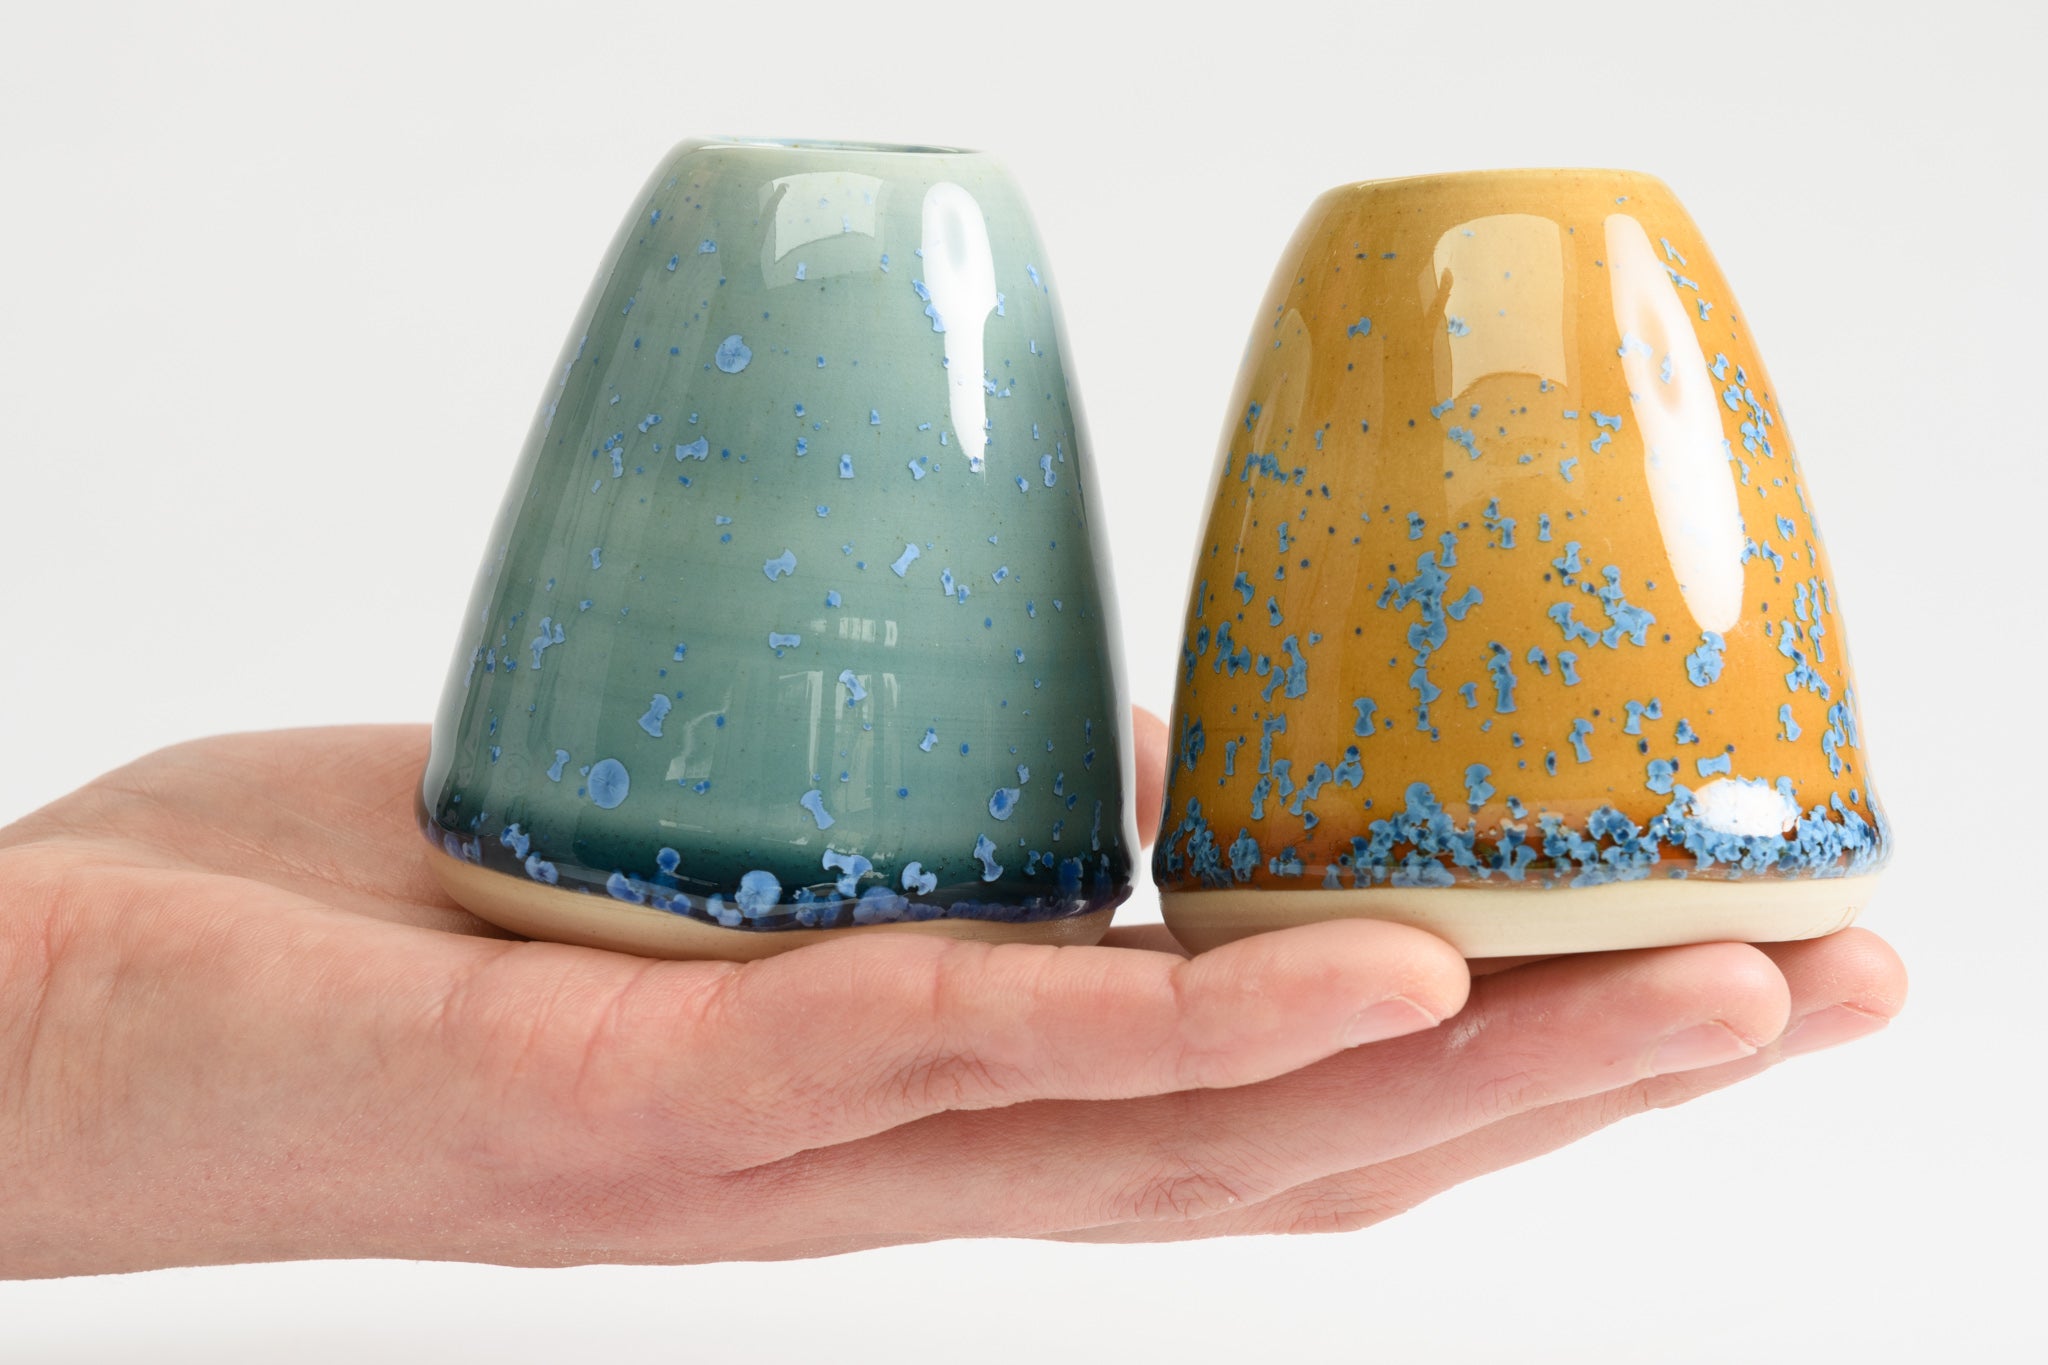 Pair of mini vases in teal and amber